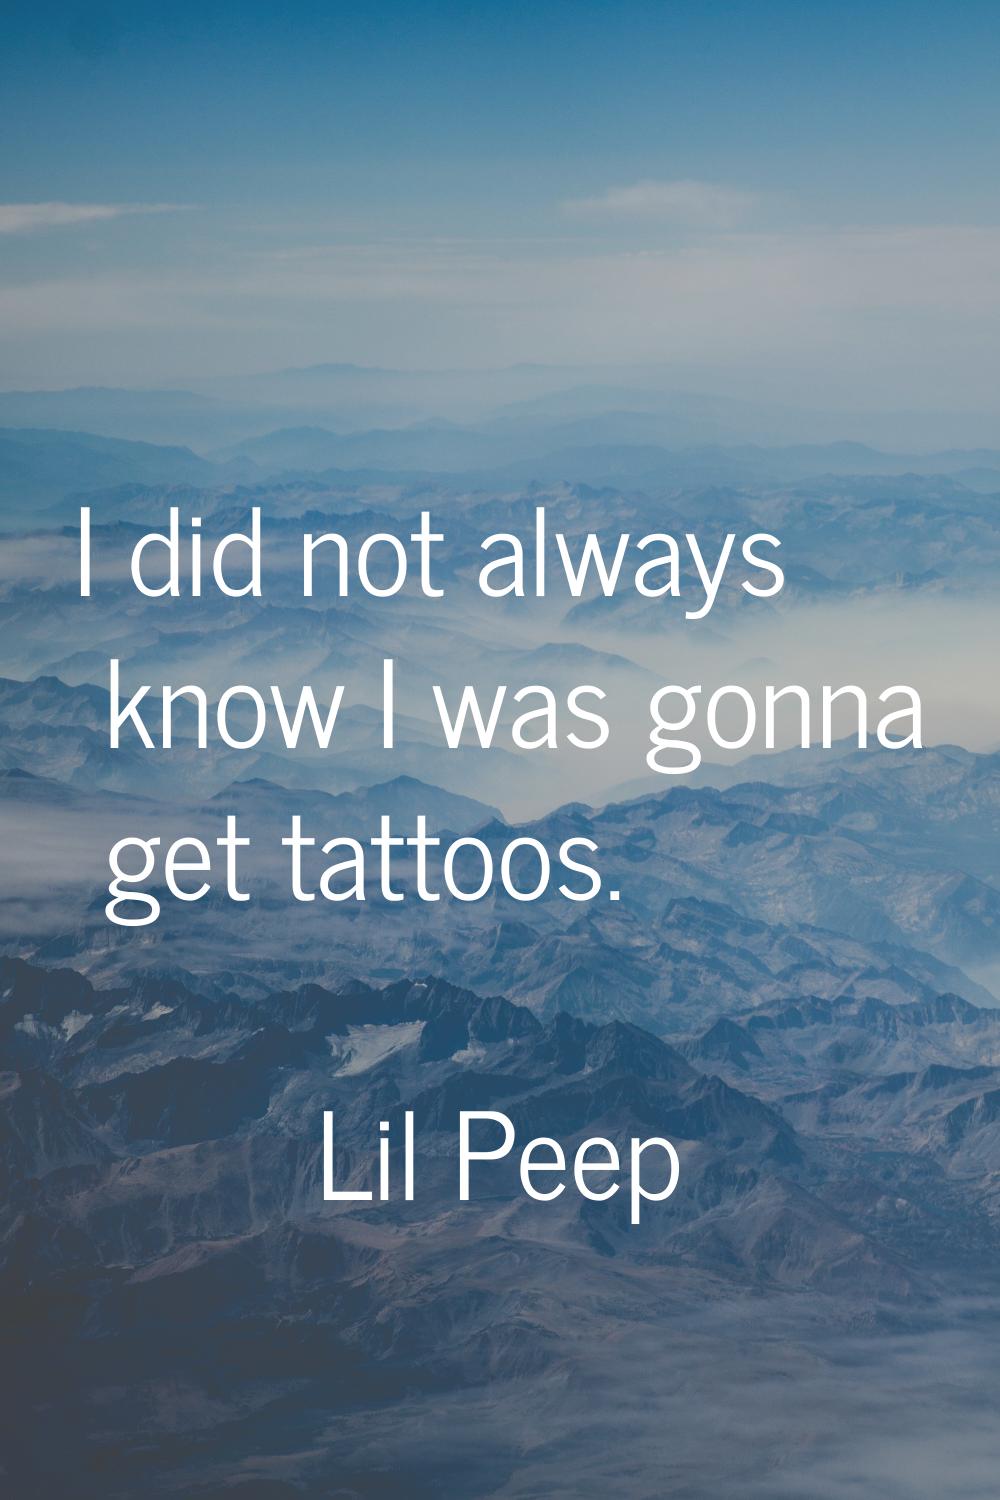 I did not always know I was gonna get tattoos.